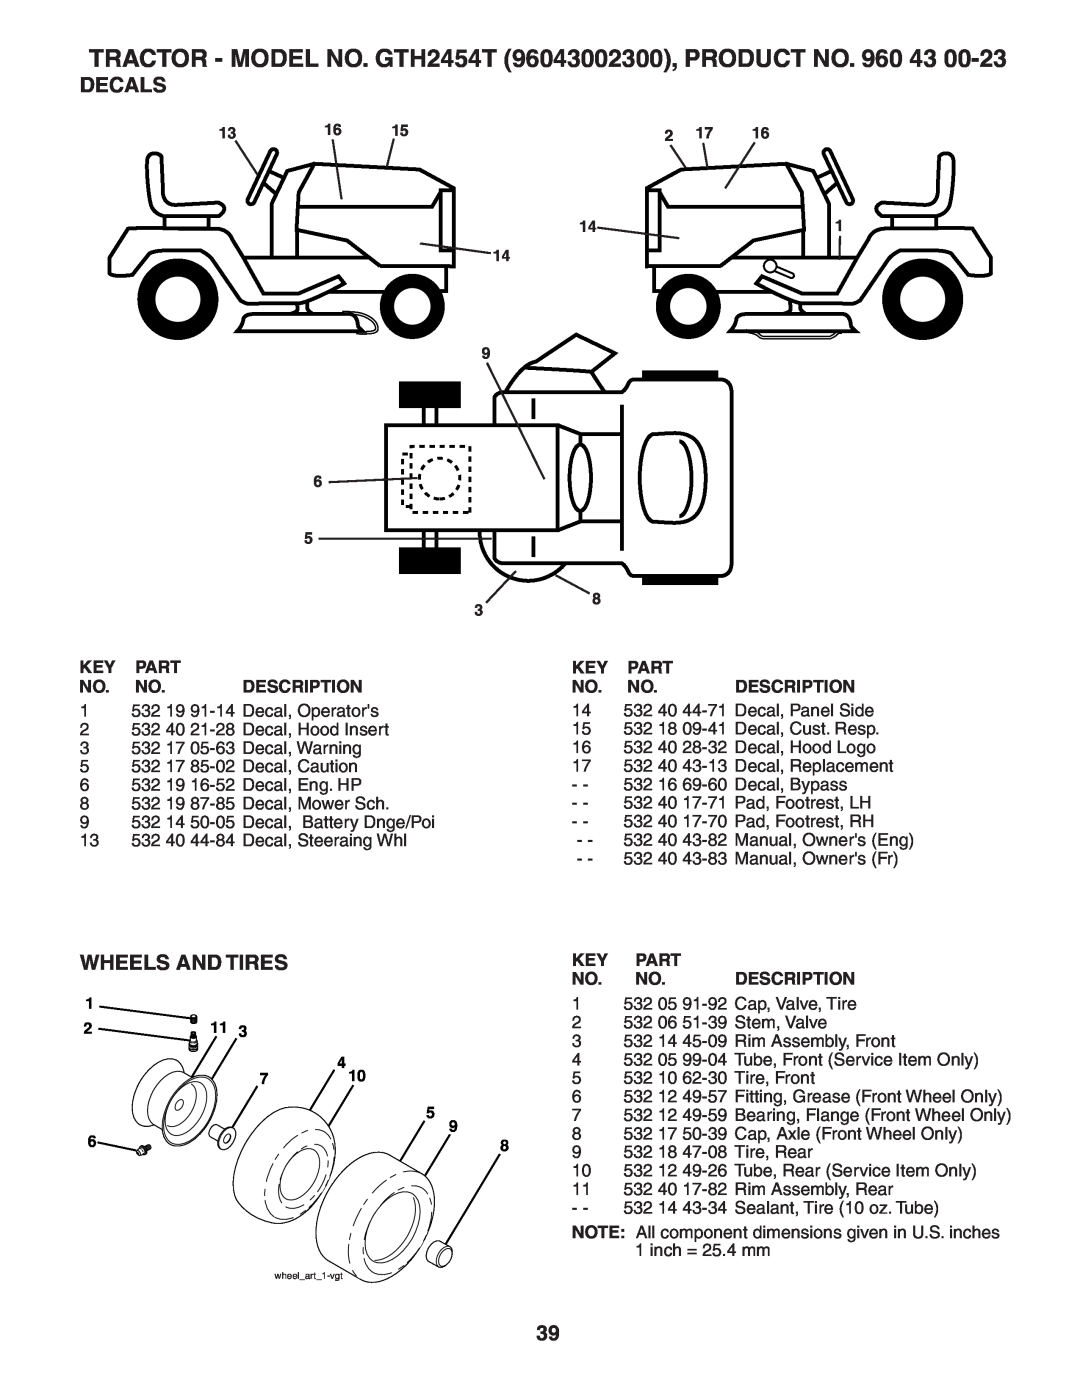 Husqvarna owner manual Decals, Wheels And Tires, TRACTOR - MODEL NO. GTH2454T 96043002300, PRODUCT NO, wheelart1-vgt 